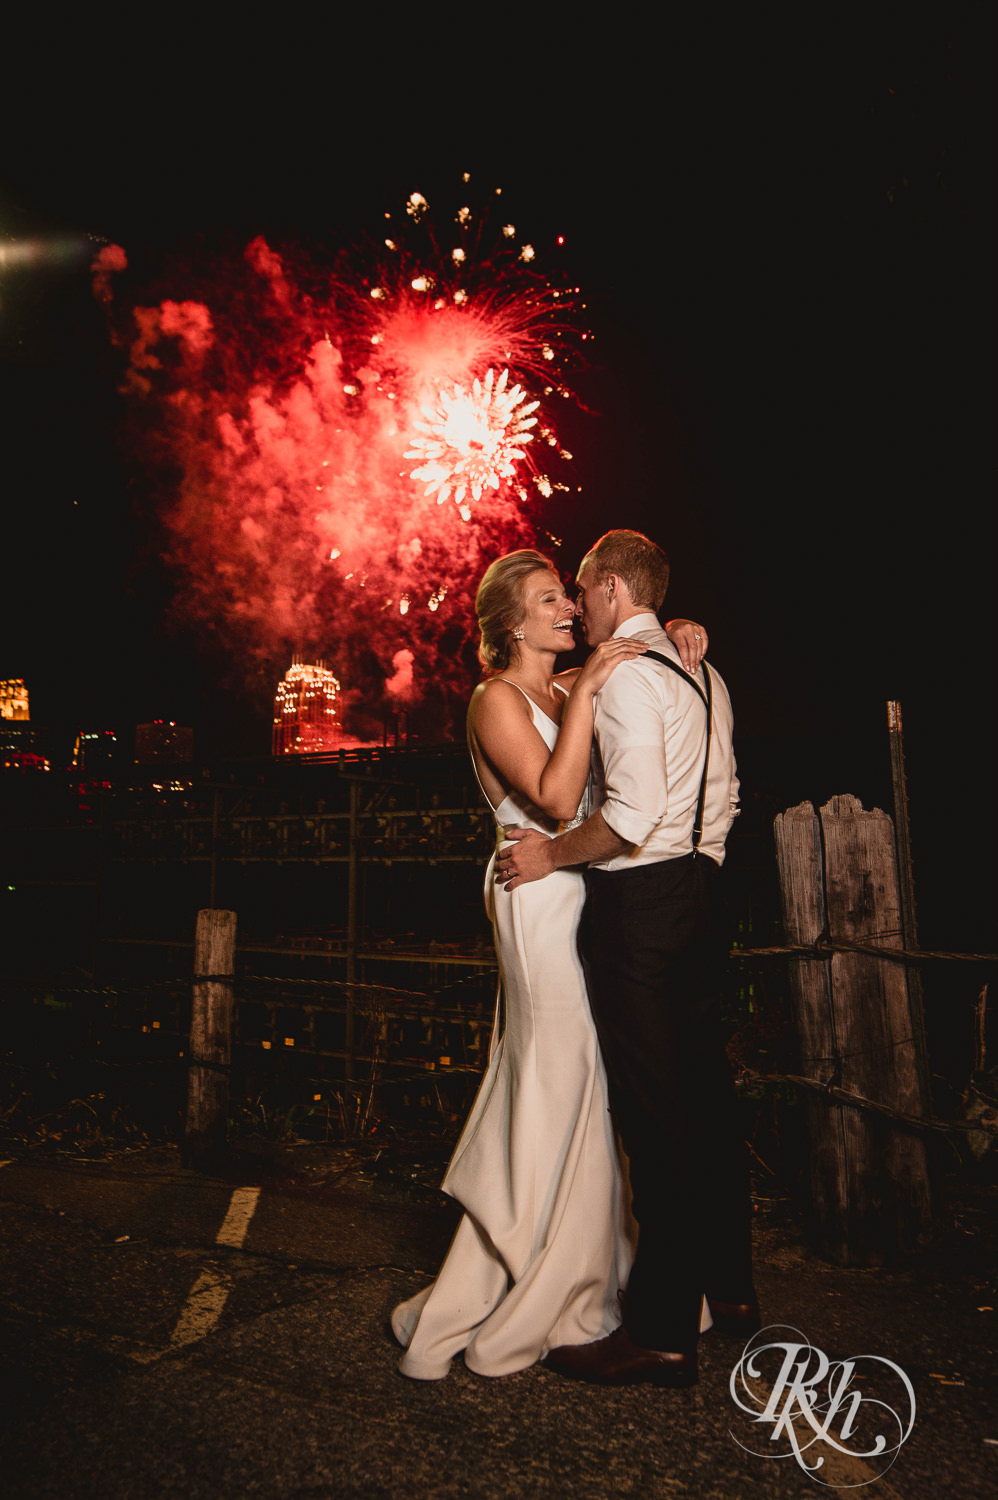 Bride and groom kiss in front of fireworks in Minneapolis, Minnesota.